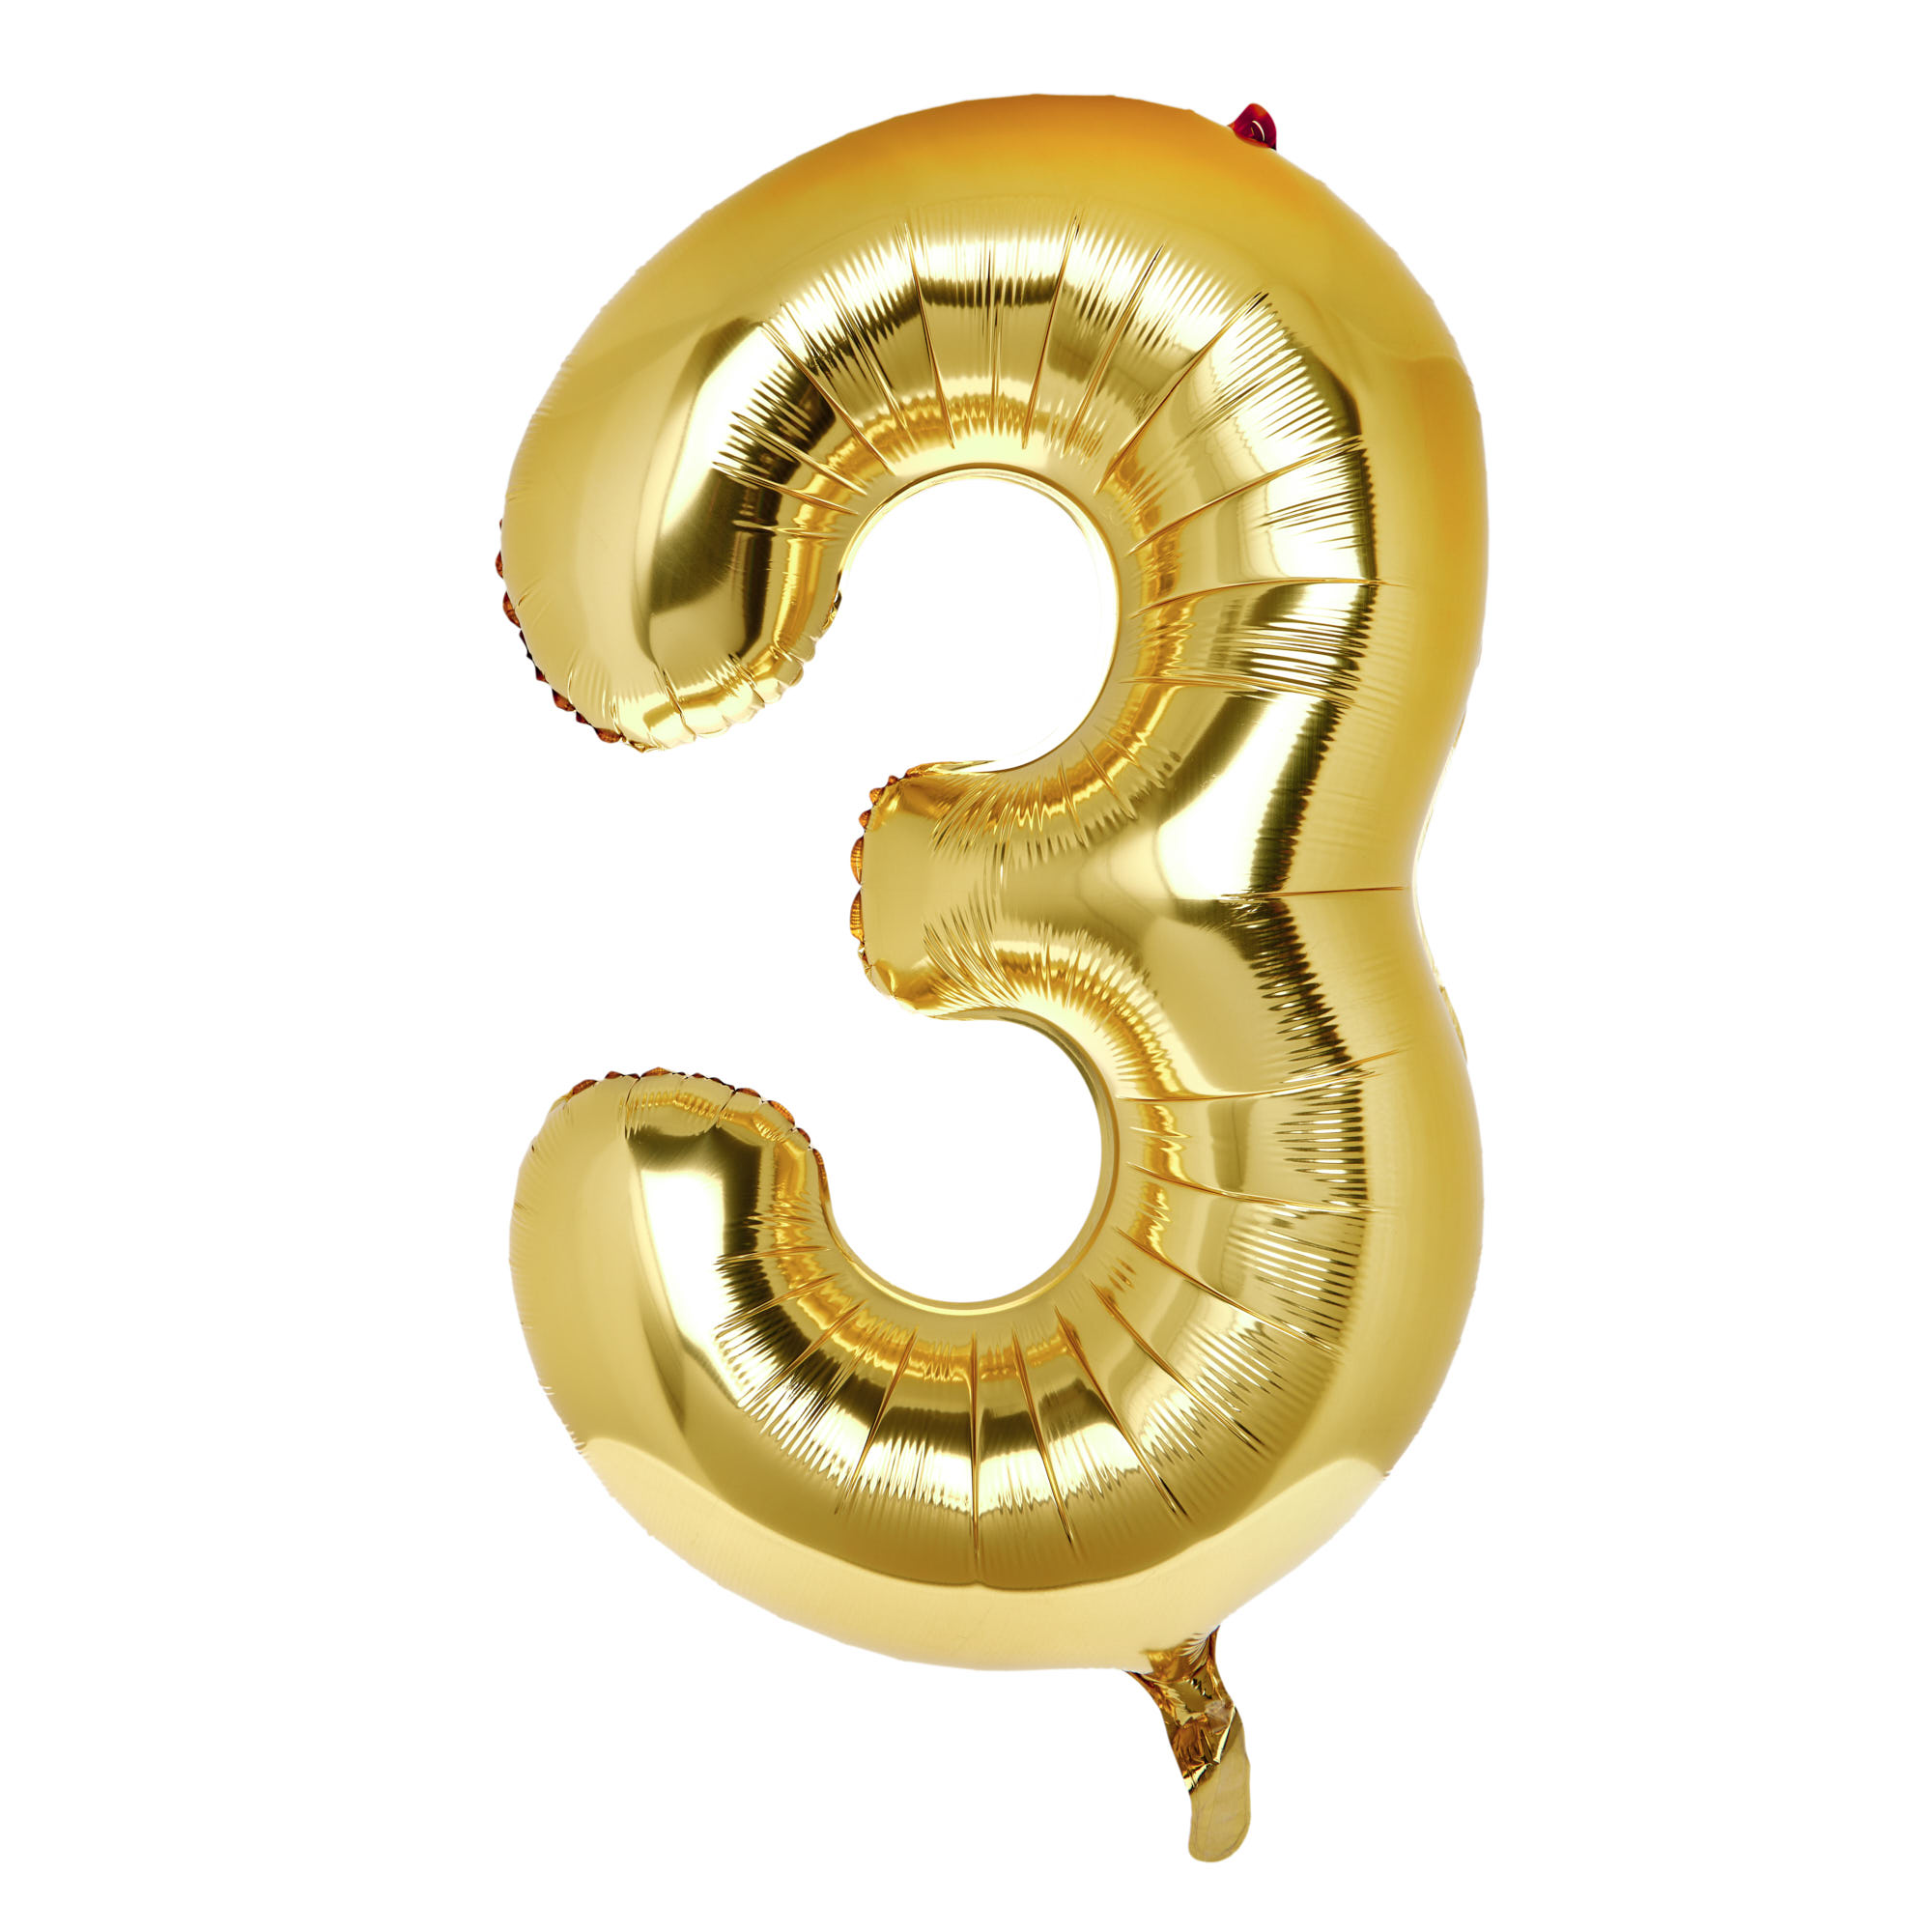 Large 34-Inch Gold Number 3 Foil Helium Balloon (Uninflated)